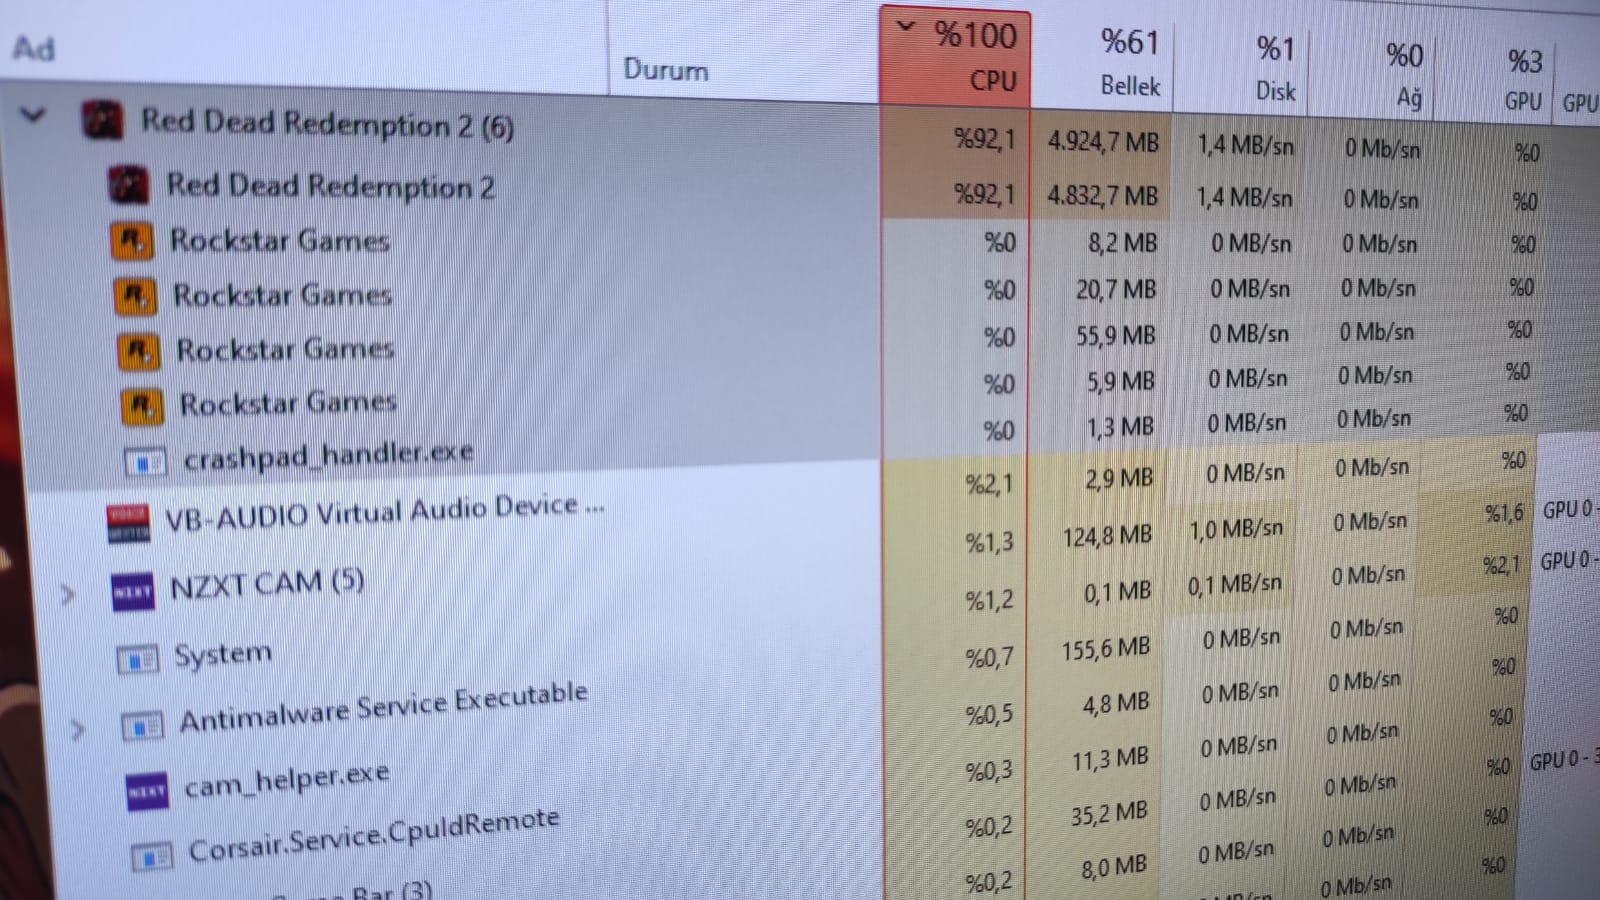 Red Dead Redemption 2 High CPU usage, Low GPU usage. Is this normal? :  PCRedDead